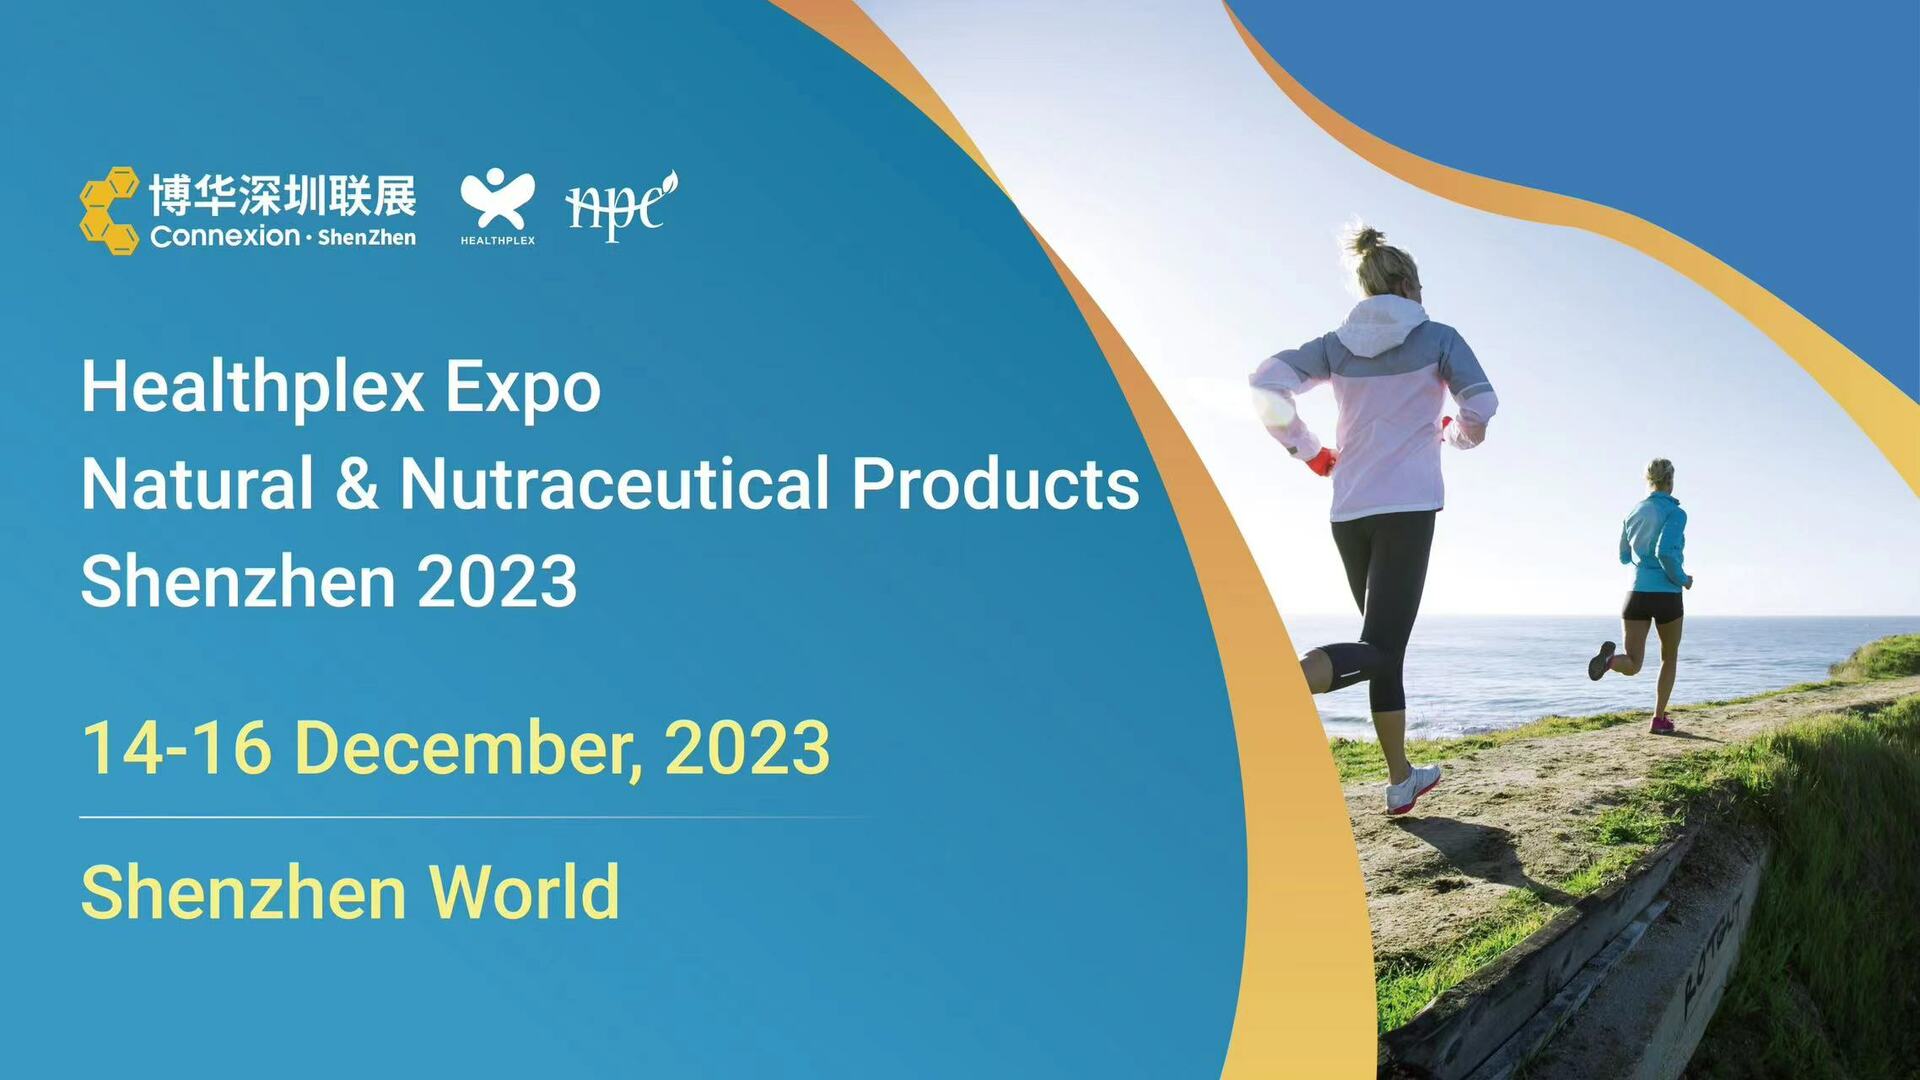 Healthplex Expo / Natural and Nutraceutical Products Shenzhen 2023, Shenzhen City, Guangdong, China